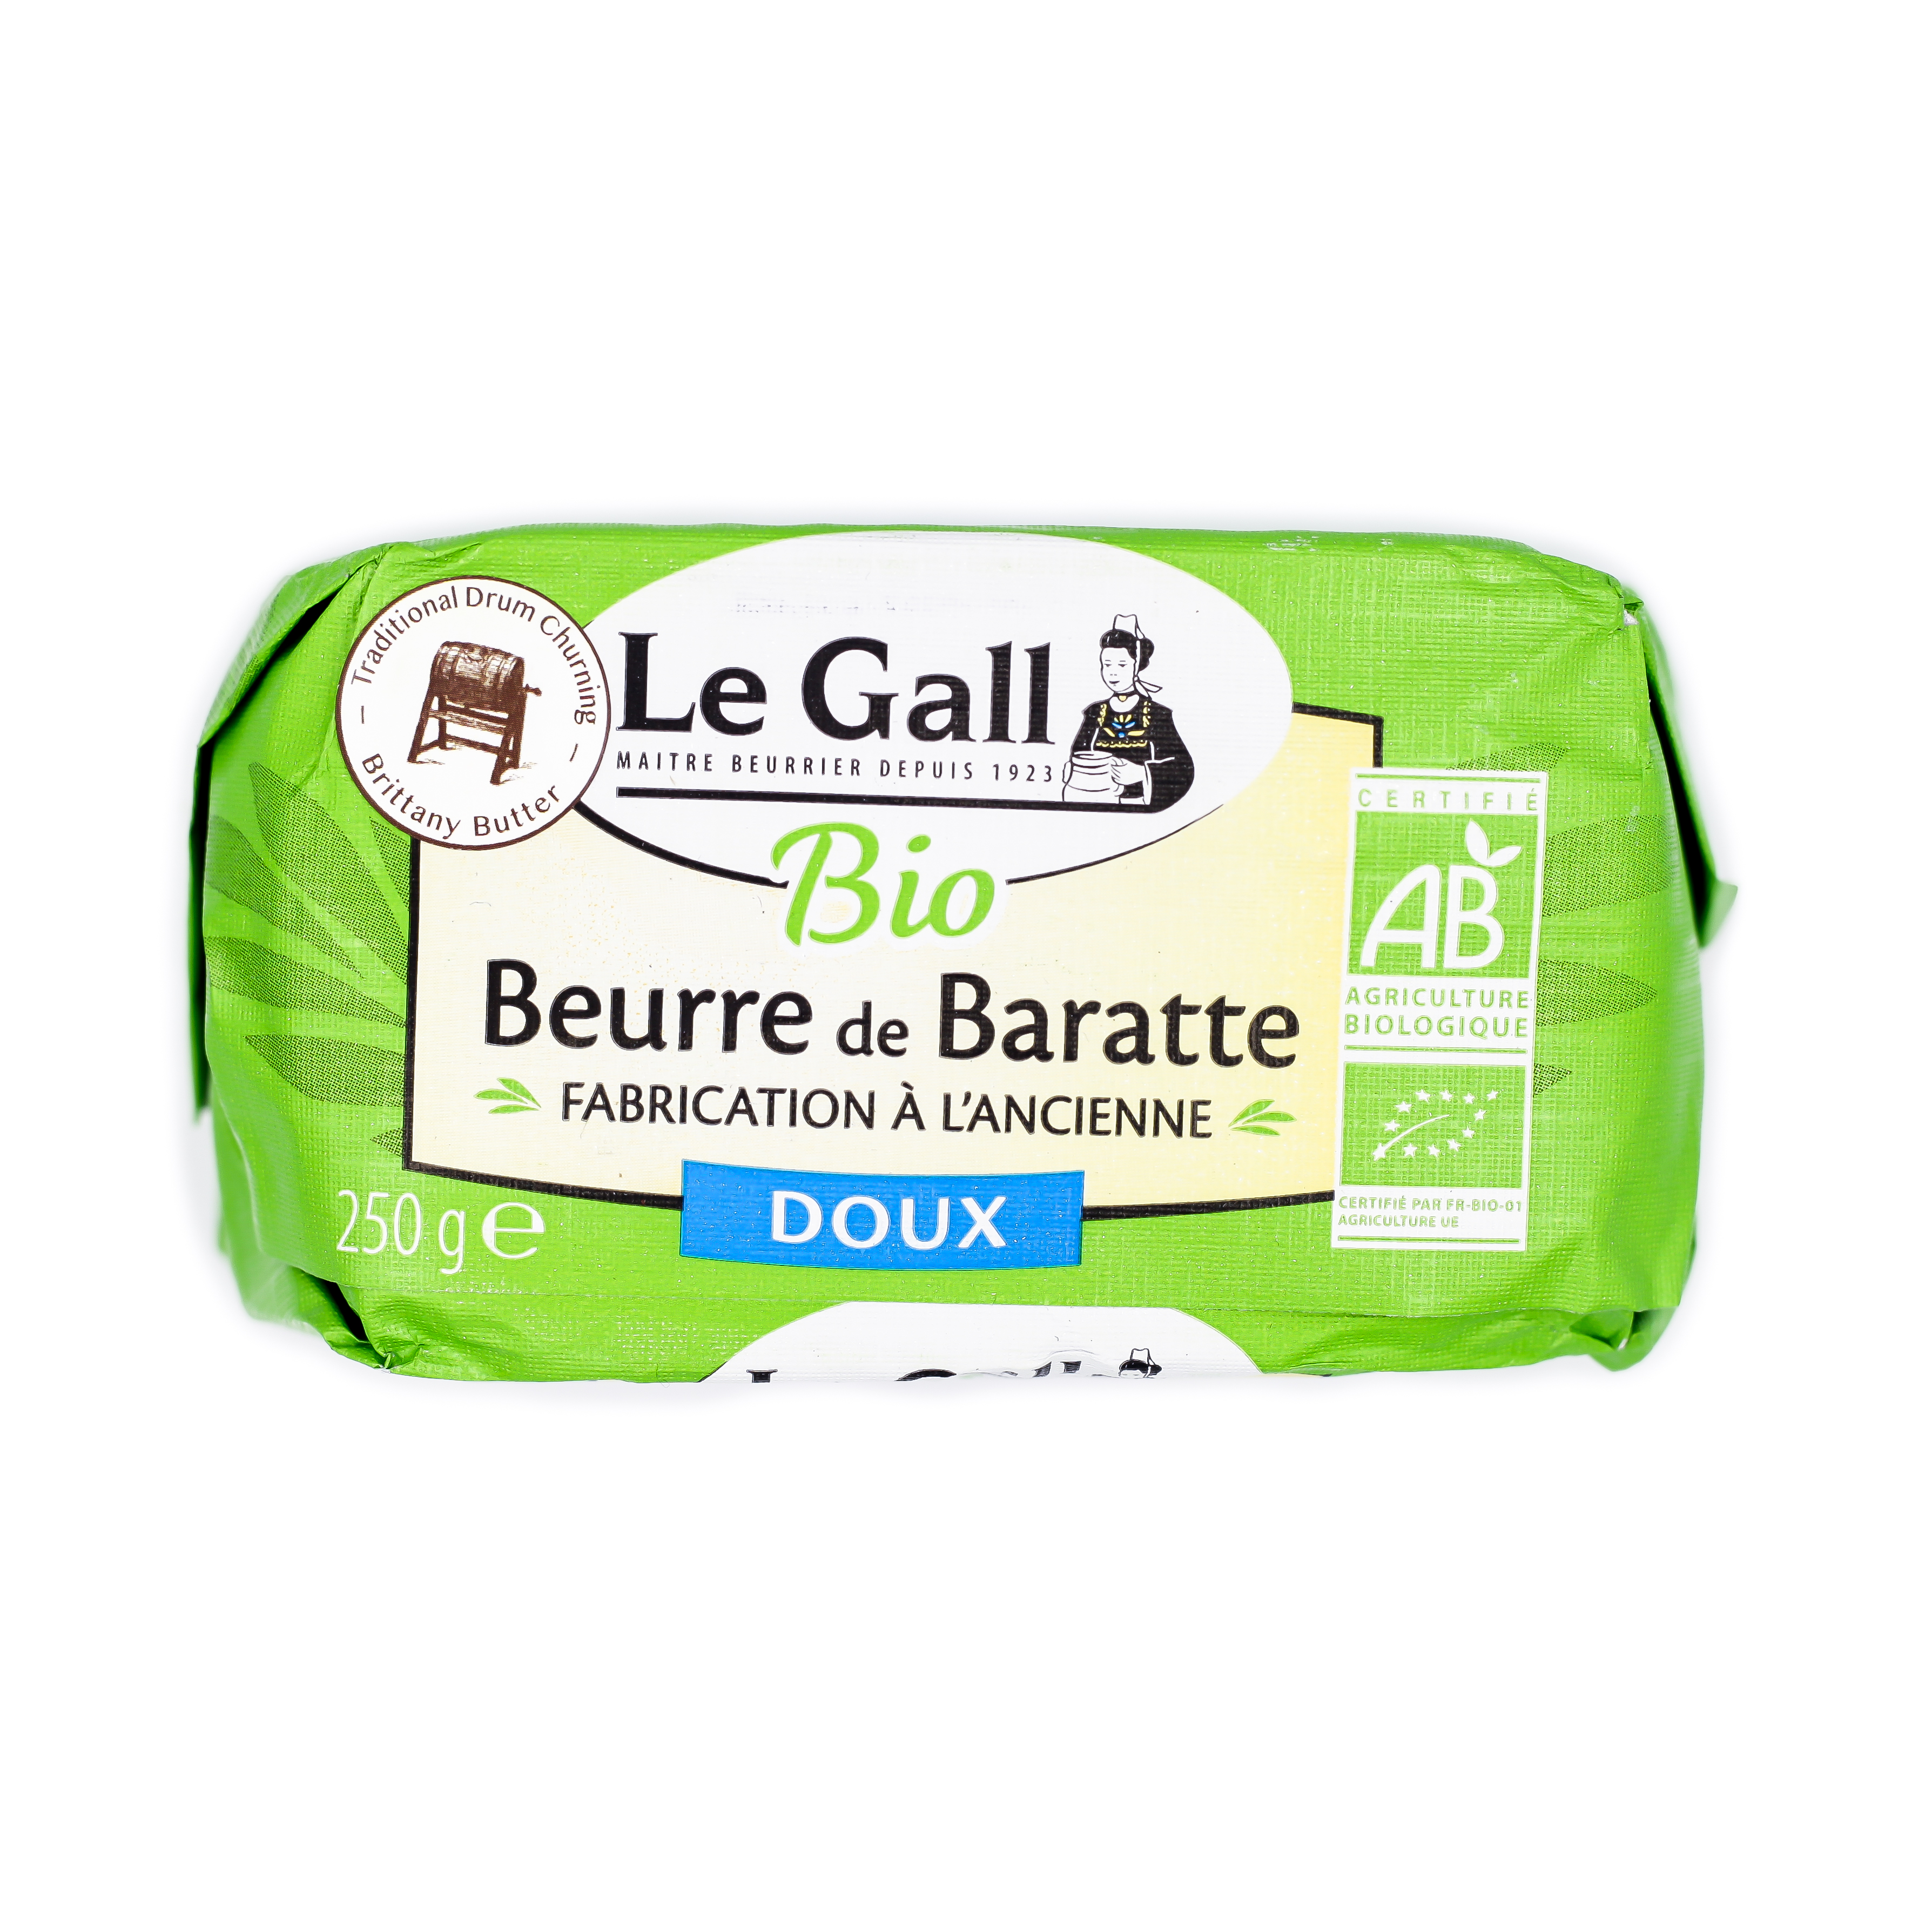 Le Gall: Organic Artisanal Churned Butter, Unsalted